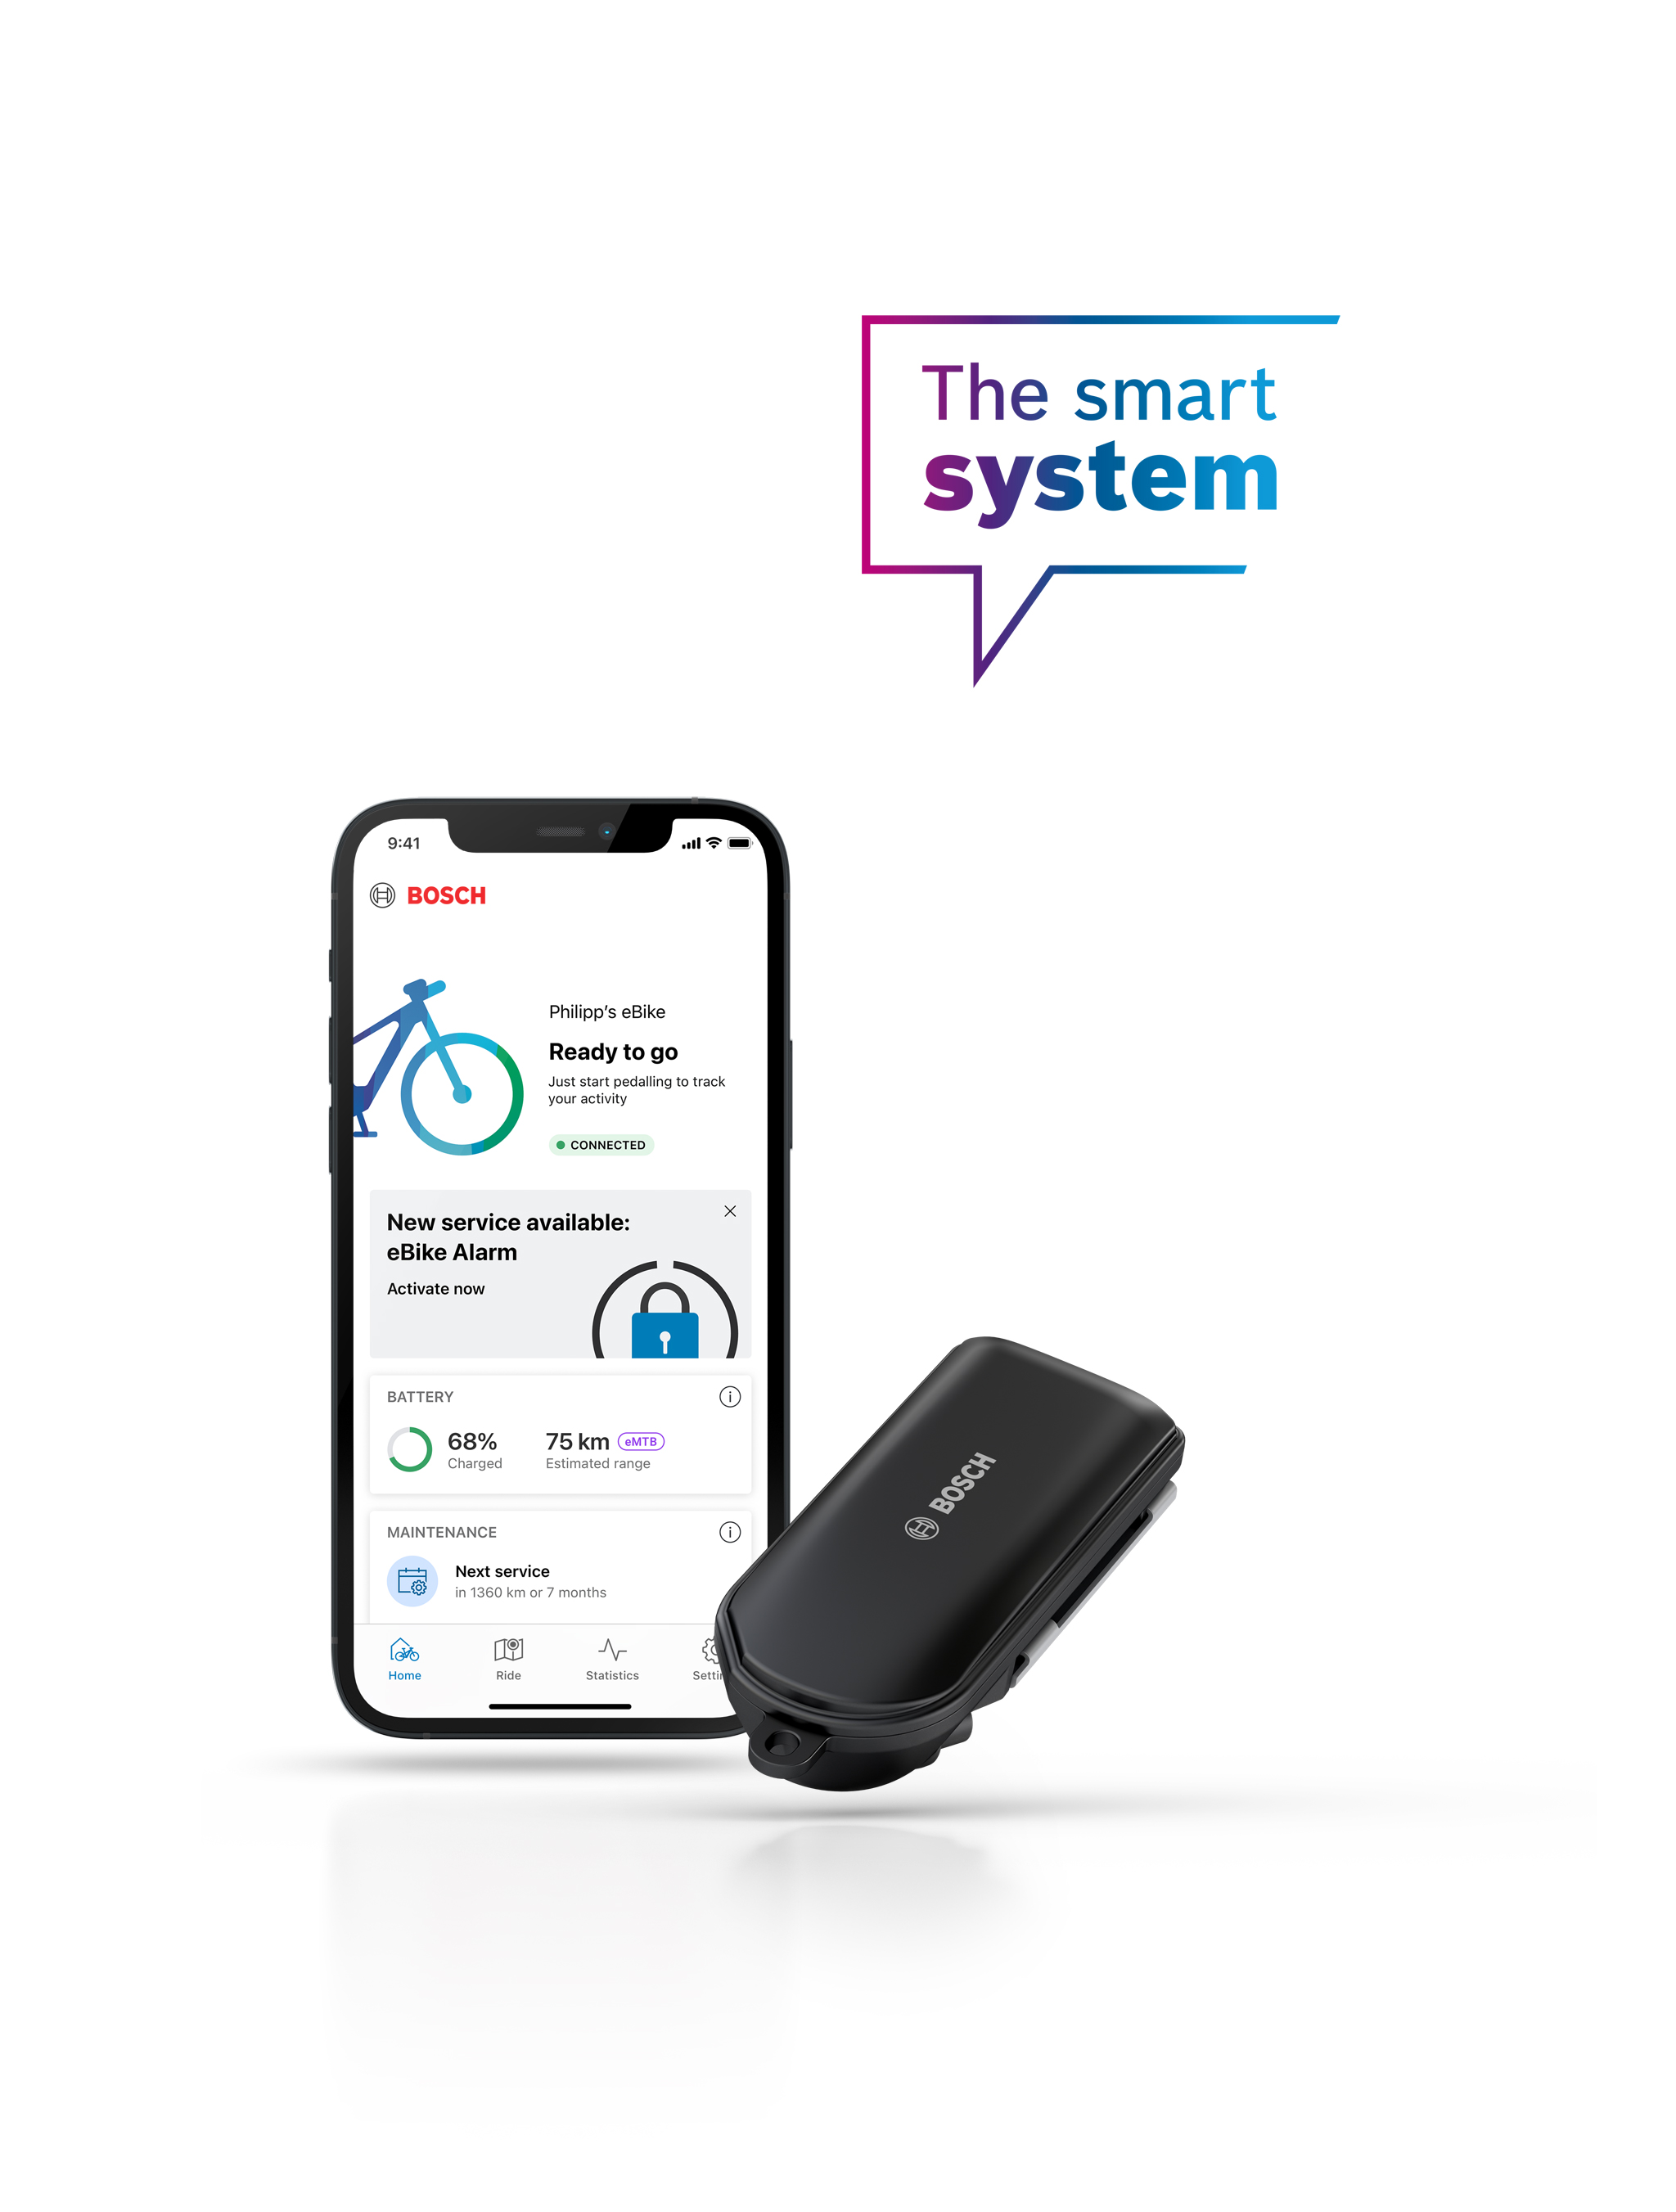 eBike Alarm makes parking eBikes, with the smart system, even more secure and provides for more comprehensive digital theft protection, in addition to the mechanical lock. 